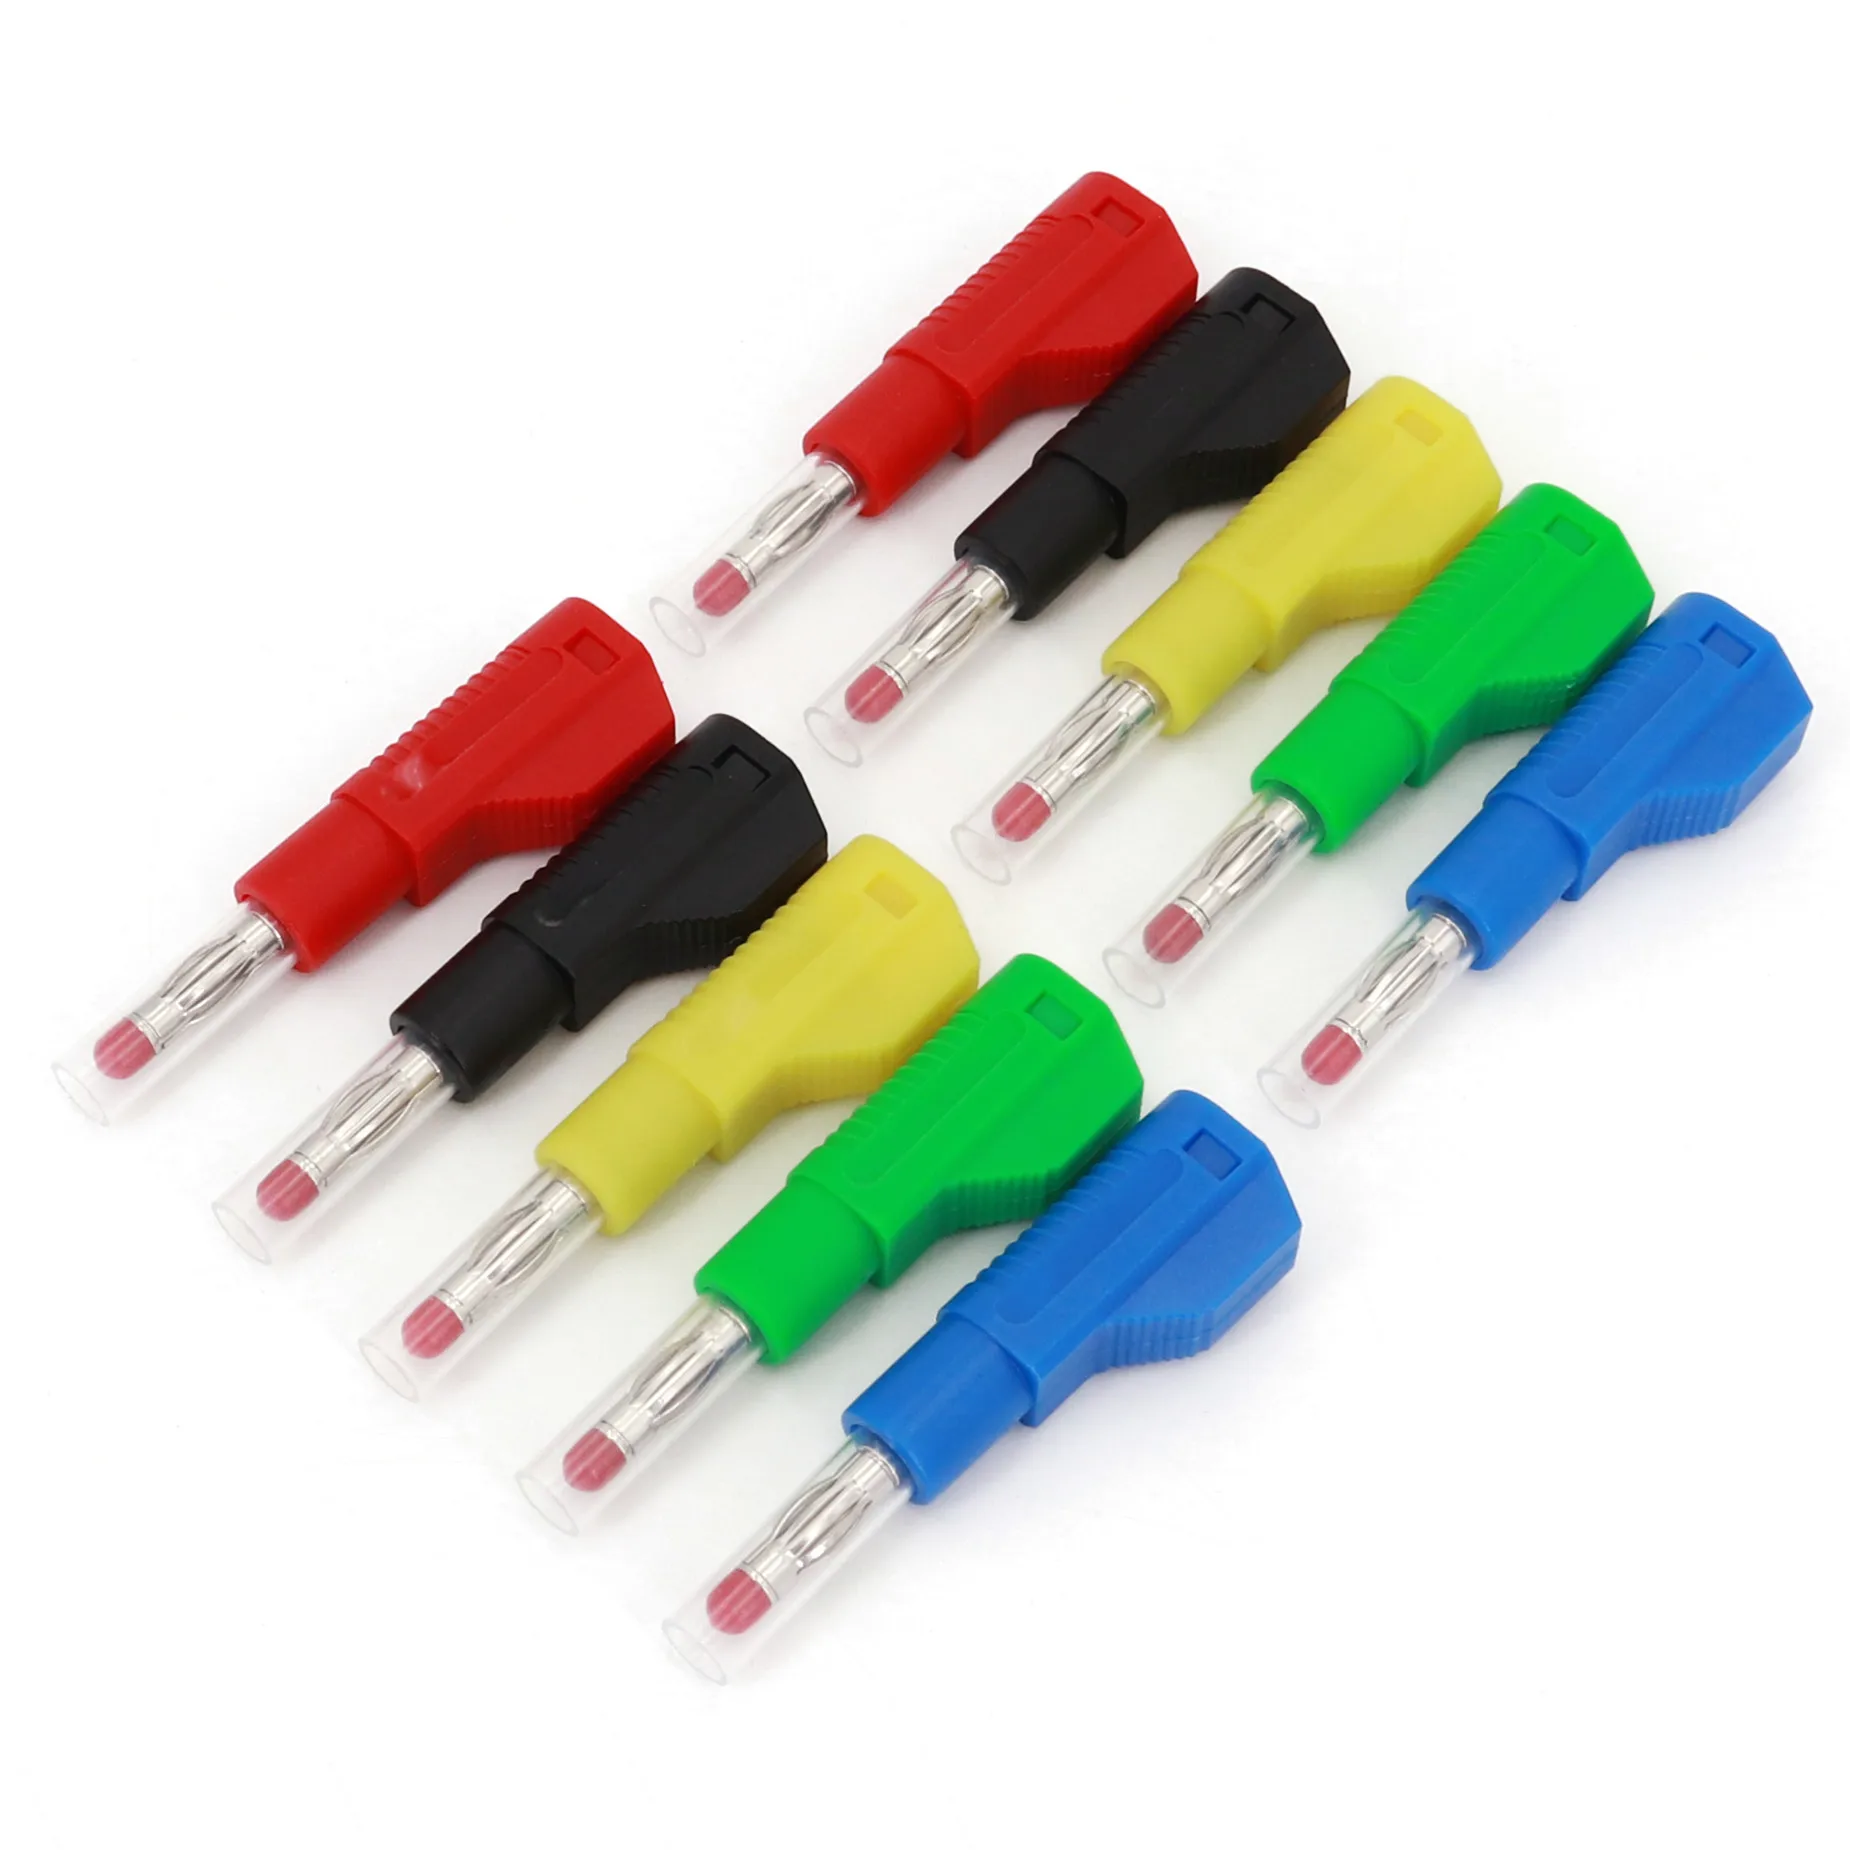 10pcs-4mm-male-retractable-tube-stackable-banana-plug-wire-solder-connector